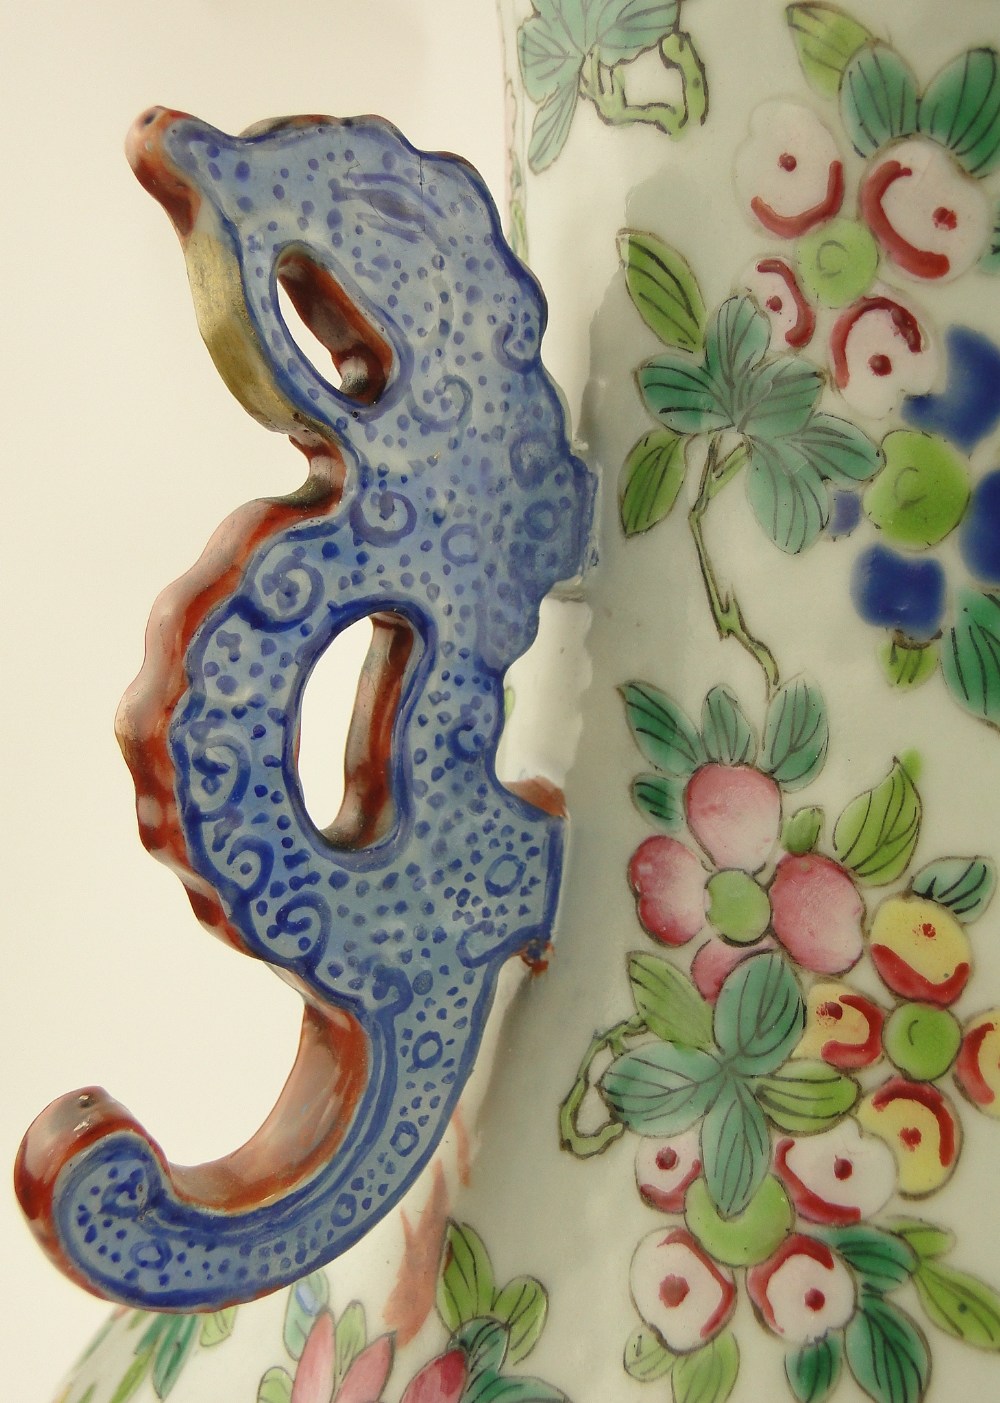 A Cantonese porcelain vase
with panels depicting figures, on butterfly and floral decorated ground, - Image 4 of 11